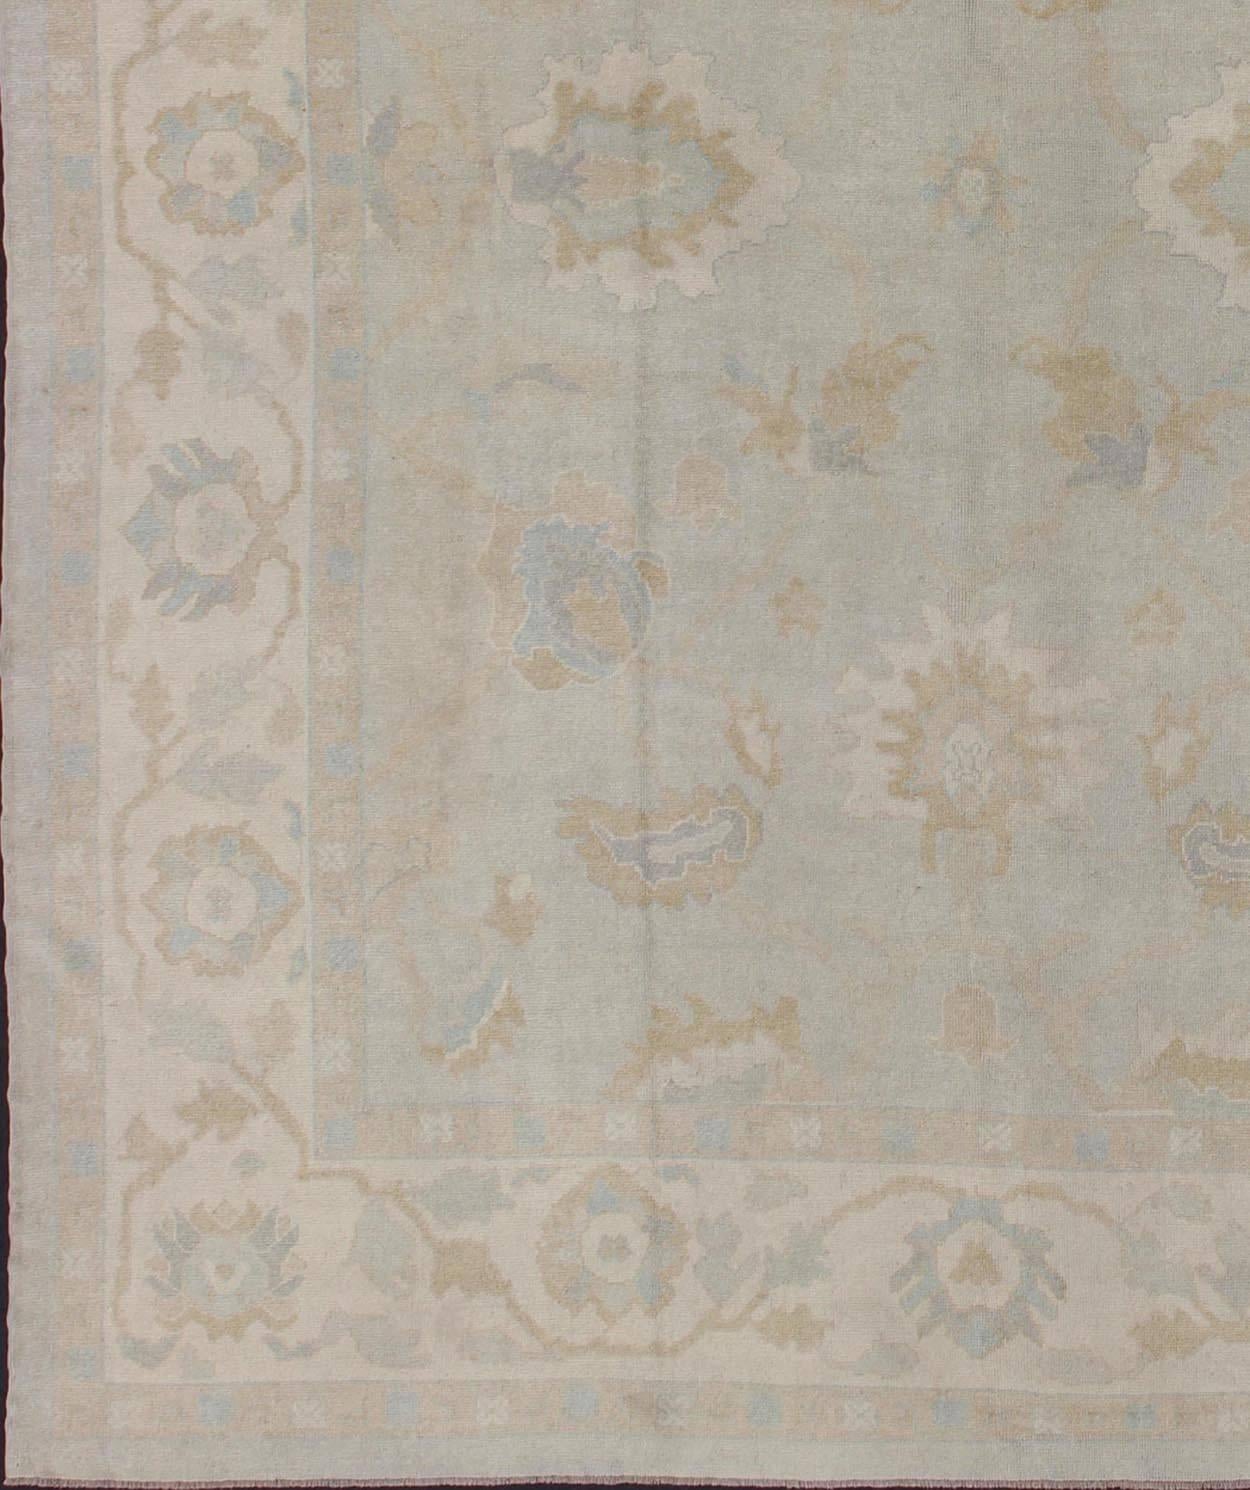 This vintage Turkish Oushak rug is remarkably elegant in both color and design. The central field of light gray plays host to a variety of large-scale blossoms in an all-over pattern with intermixed floral and palmette motifs. Complementary